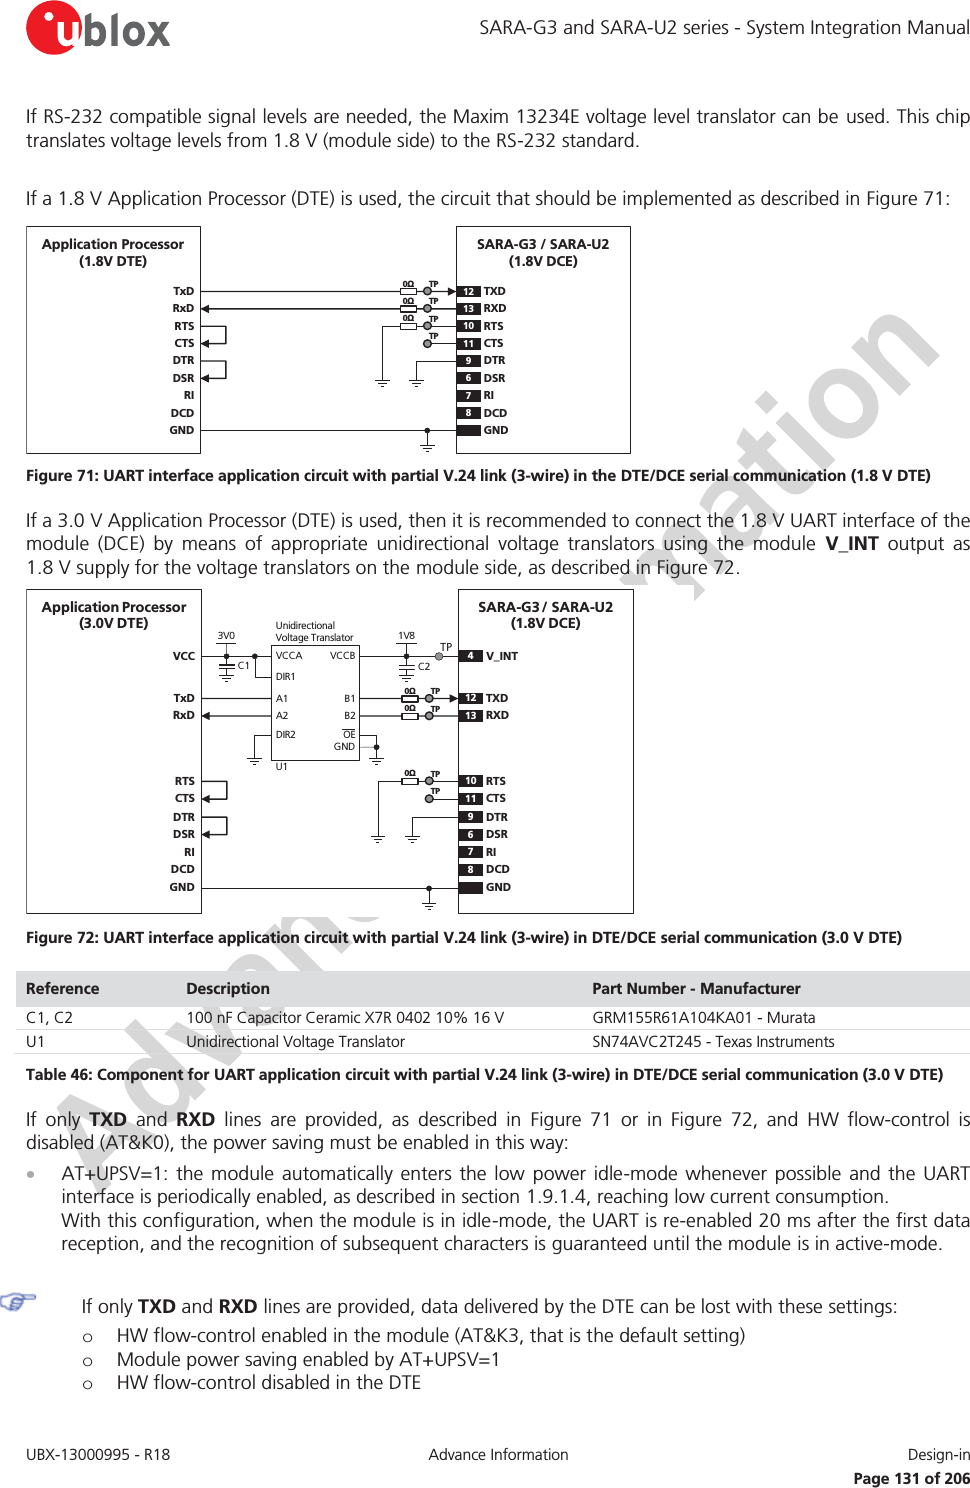 SARA-G3 and SARA-U2 series - System Integration Manual UBX-13000995 - R18  Advance Information  Design-in   Page 131 of 206 If RS-232 compatible signal levels are needed, the Maxim 13234E voltage level translator can be used. This chip translates voltage levels from 1.8 V (module side) to the RS-232 standard.  If a 1.8 V Application Processor (DTE) is used, the circuit that should be implemented as described in Figure 71: TxDApplication Processor(1.8V DTE)RxDRTSCTSDTRDSRRIDCDGNDSARA-G3 / SARA-U2(1.8V DCE)12 TXD9DTR13RXD10RTS11CTS6DSR7RI8DCDGND0ΩTP0ΩTP0ΩTPTP Figure 71: UART interface application circuit with partial V.24 link (3-wire) in the DTE/DCE serial communication (1.8 V DTE) If a 3.0 V Application Processor (DTE) is used, then it is recommended to connect the 1.8 V UART interface of the module (DCE) by means of appropriate unidirectional voltage translators using the module V_INT output as 1.8 V supply for the voltage translators on the module side, as described in Figure 72. 4V_INTTxDApplication Processor(3.0V DTE)RxDDTRDSRRIDCDGNDSARA-G3 /  SARA-U2(1.8V DCE)12TXD9DTR13 RXD6DSR7RI8DCDGND1V8B1 A1GNDU1VCCBVCCAUnidirectionalVoltage TranslatorC1 C23V0DIR1DIR2 OEVCCB2 A2RTSCTS10RTS11CTSTP0ΩTP0ΩTP0ΩTPTP Figure 72: UART interface application circuit with partial V.24 link (3-wire) in DTE/DCE serial communication (3.0 V DTE) Reference  Description  Part Number - Manufacturer C1, C2 100 nF Capacitor Ceramic X7R 0402 10% 16 V GRM155R61A104KA01 - Murata U1 Unidirectional Voltage Translator SN74AVC2T245 - Texas Instruments Table 46: Component for UART application circuit with partial V.24 link (3-wire) in DTE/DCE serial communication (3.0 V DTE) If only TXD and RXD lines are provided, as described in Figure 71 or in Figure 72, and HW flow-control is disabled (AT&amp;K0), the power saving must be enabled in this way: x AT+UPSV=1: the module automatically enters the low power idle-mode whenever possible and the UART interface is periodically enabled, as described in section 1.9.1.4, reaching low current consumption. With this configuration, when the module is in idle-mode, the UART is re-enabled 20 ms after the first data reception, and the recognition of subsequent characters is guaranteed until the module is in active-mode.   If only TXD and RXD lines are provided, data delivered by the DTE can be lost with these settings: o HW flow-control enabled in the module (AT&amp;K3, that is the default setting) o Module power saving enabled by AT+UPSV=1 o HW flow-control disabled in the DTE 